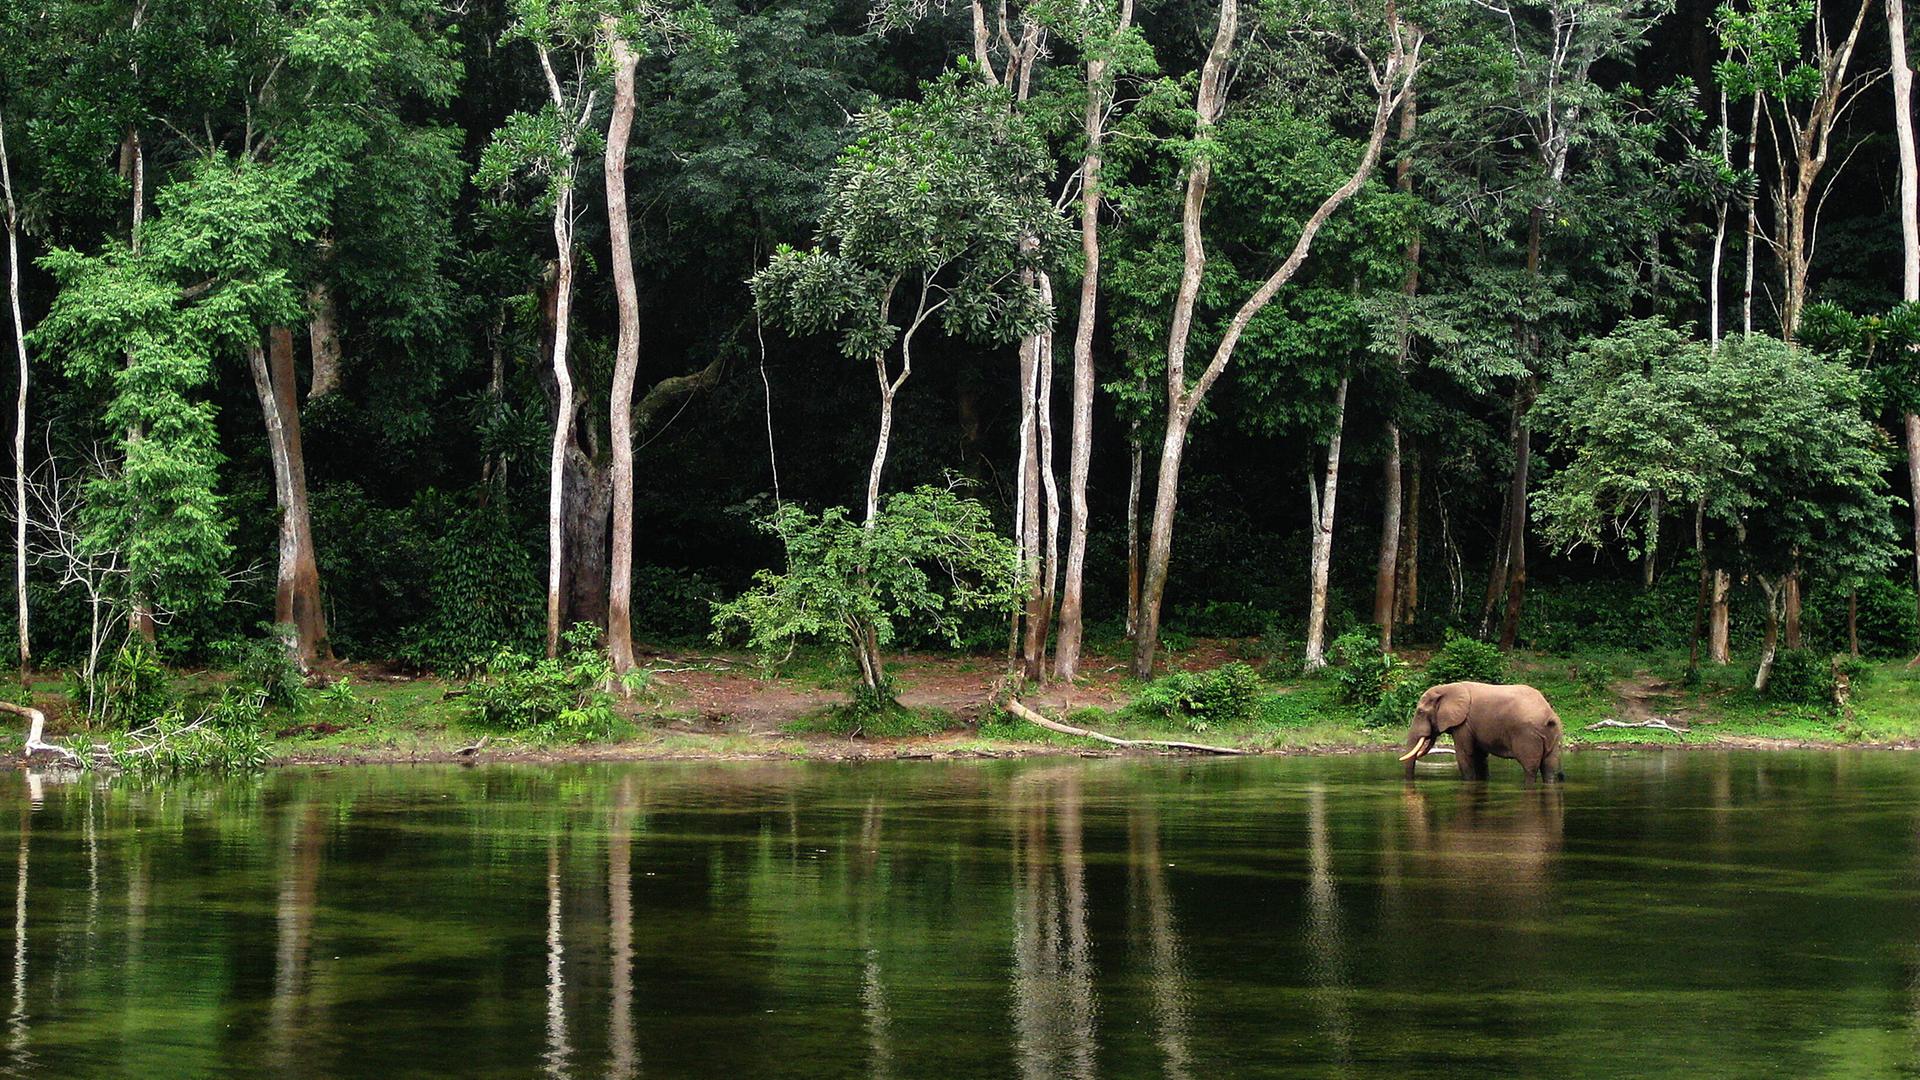 Elephant in a pond near trees - Location Congo , 1837361.jpg, wood, african, black, big, trees, wild, water, walking, forest, mammals, animals, africa, toys, carving, jungle, endangered, herd, kenya, elephant, tanzania, elephants, tusks, congo,